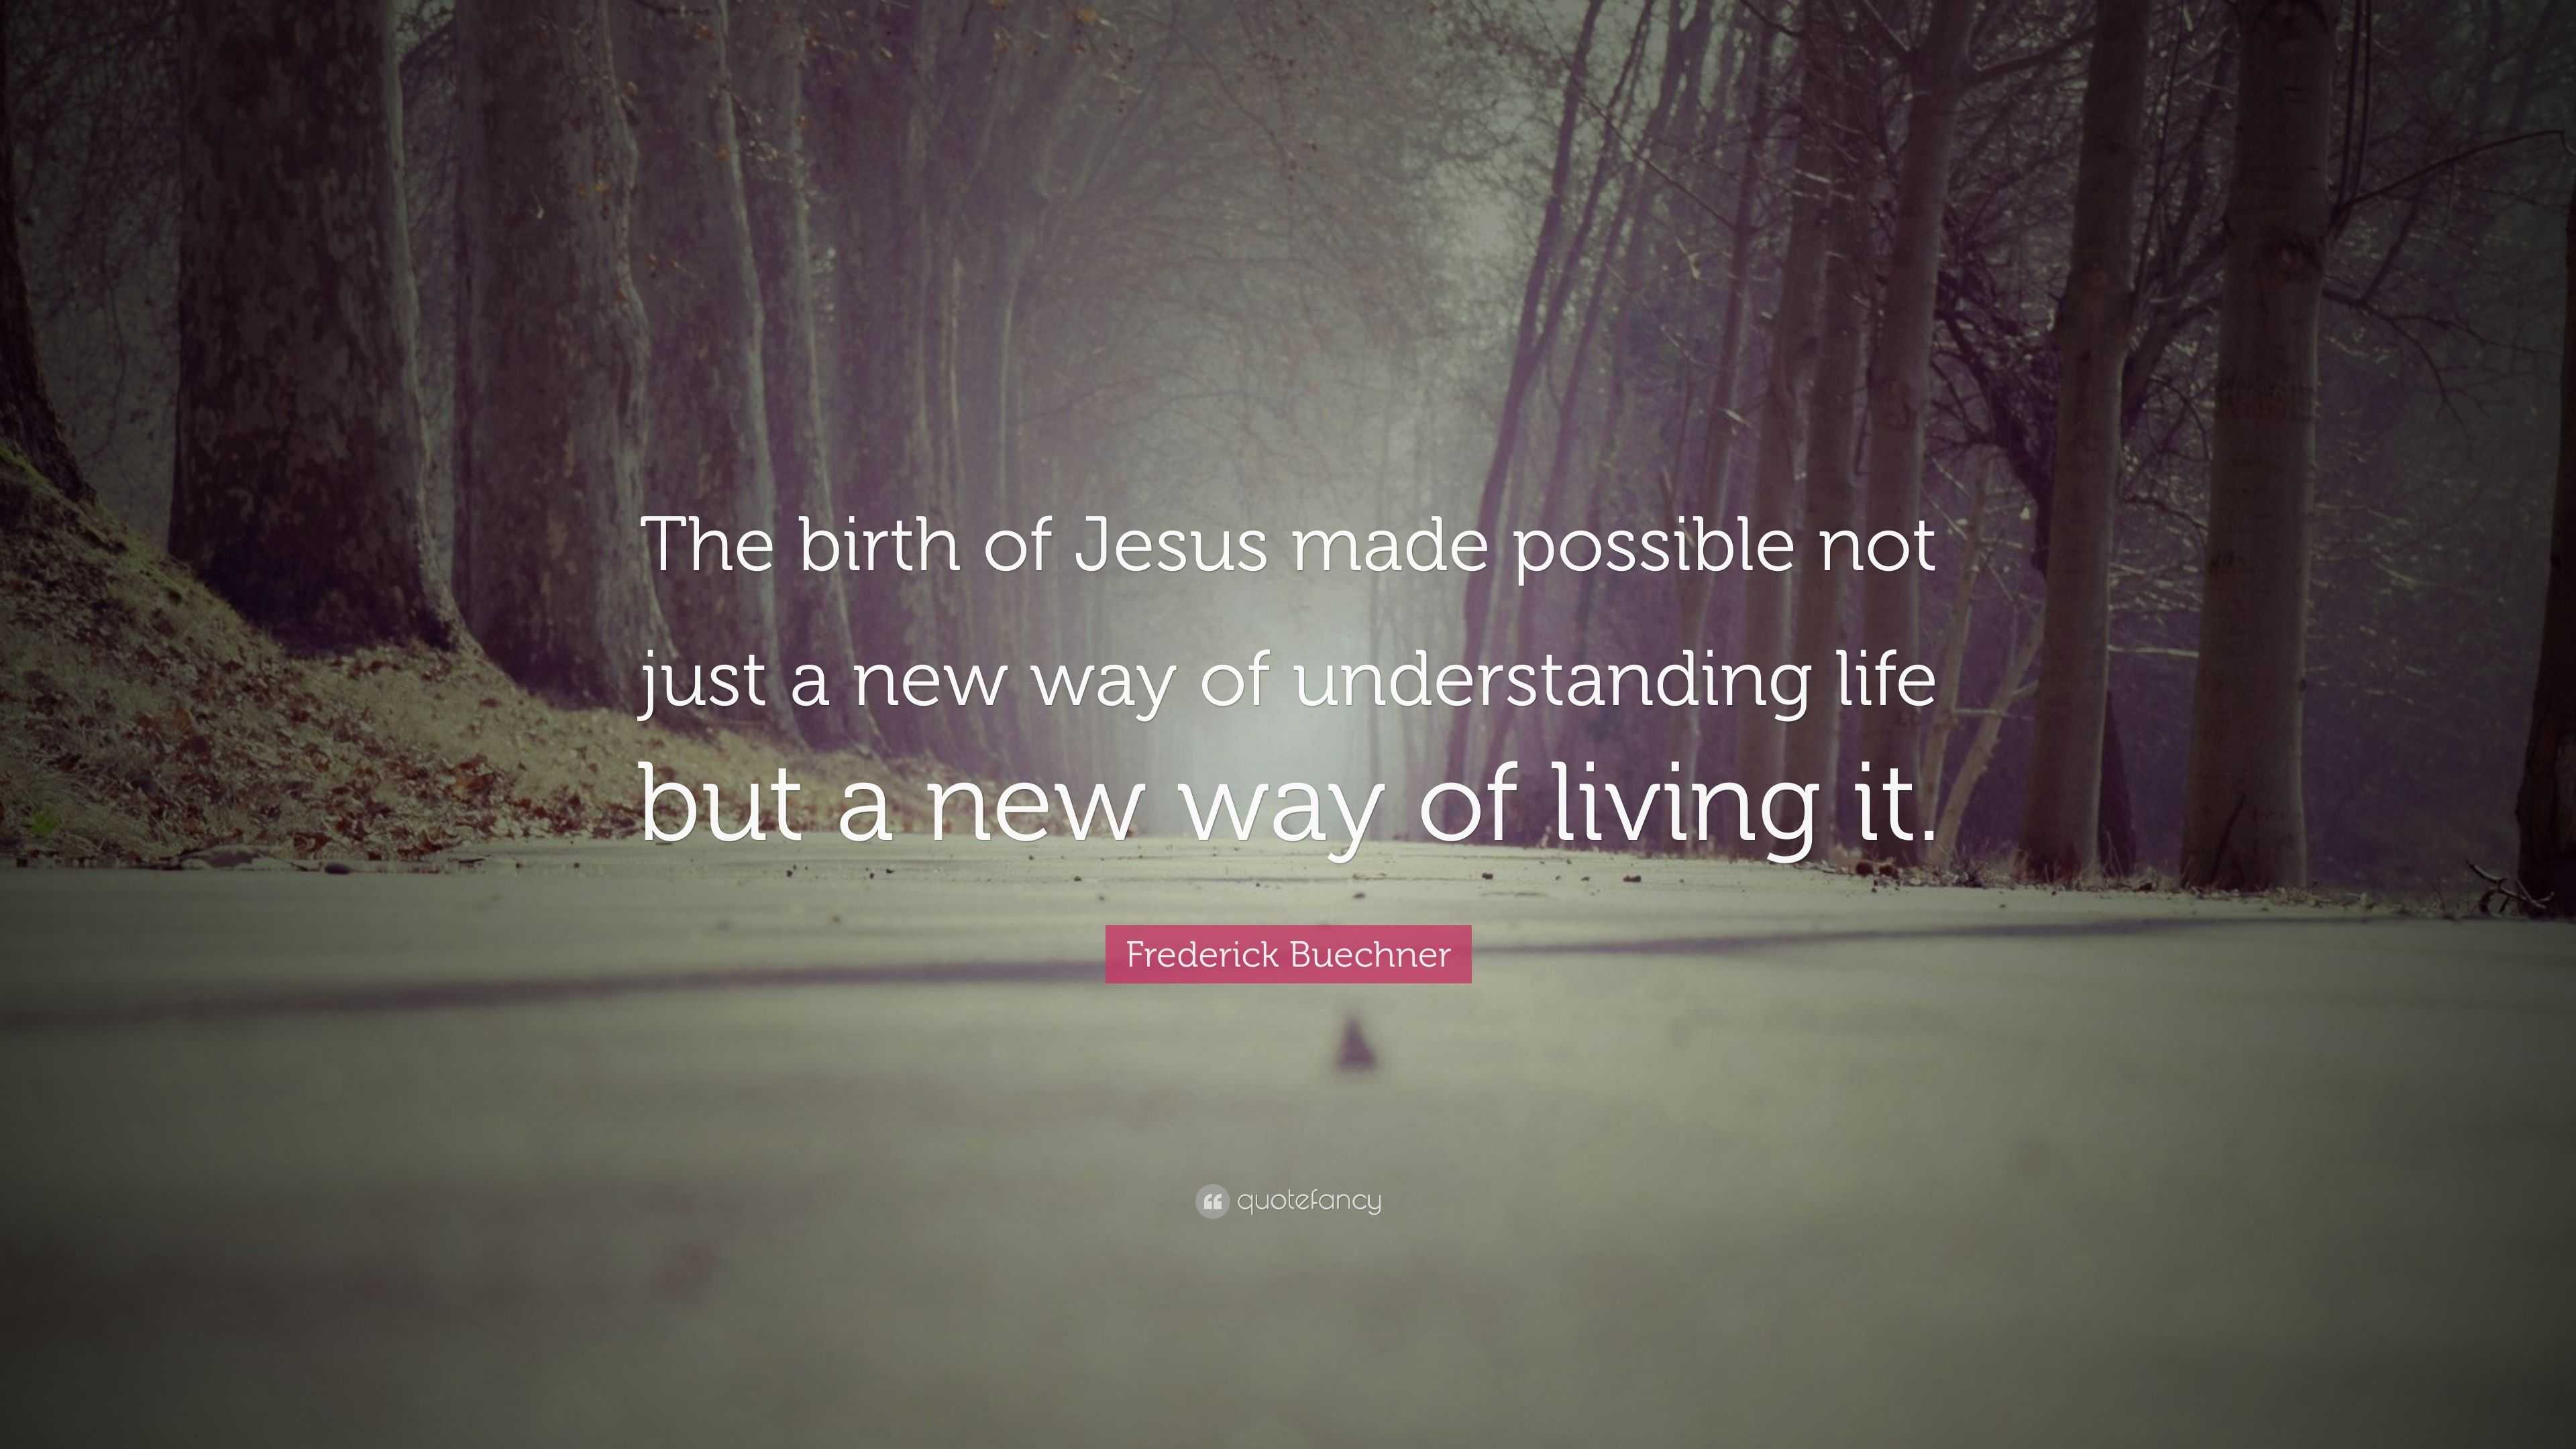 Frederick Buechner Quote “The birth of Jesus made possible not just a new way